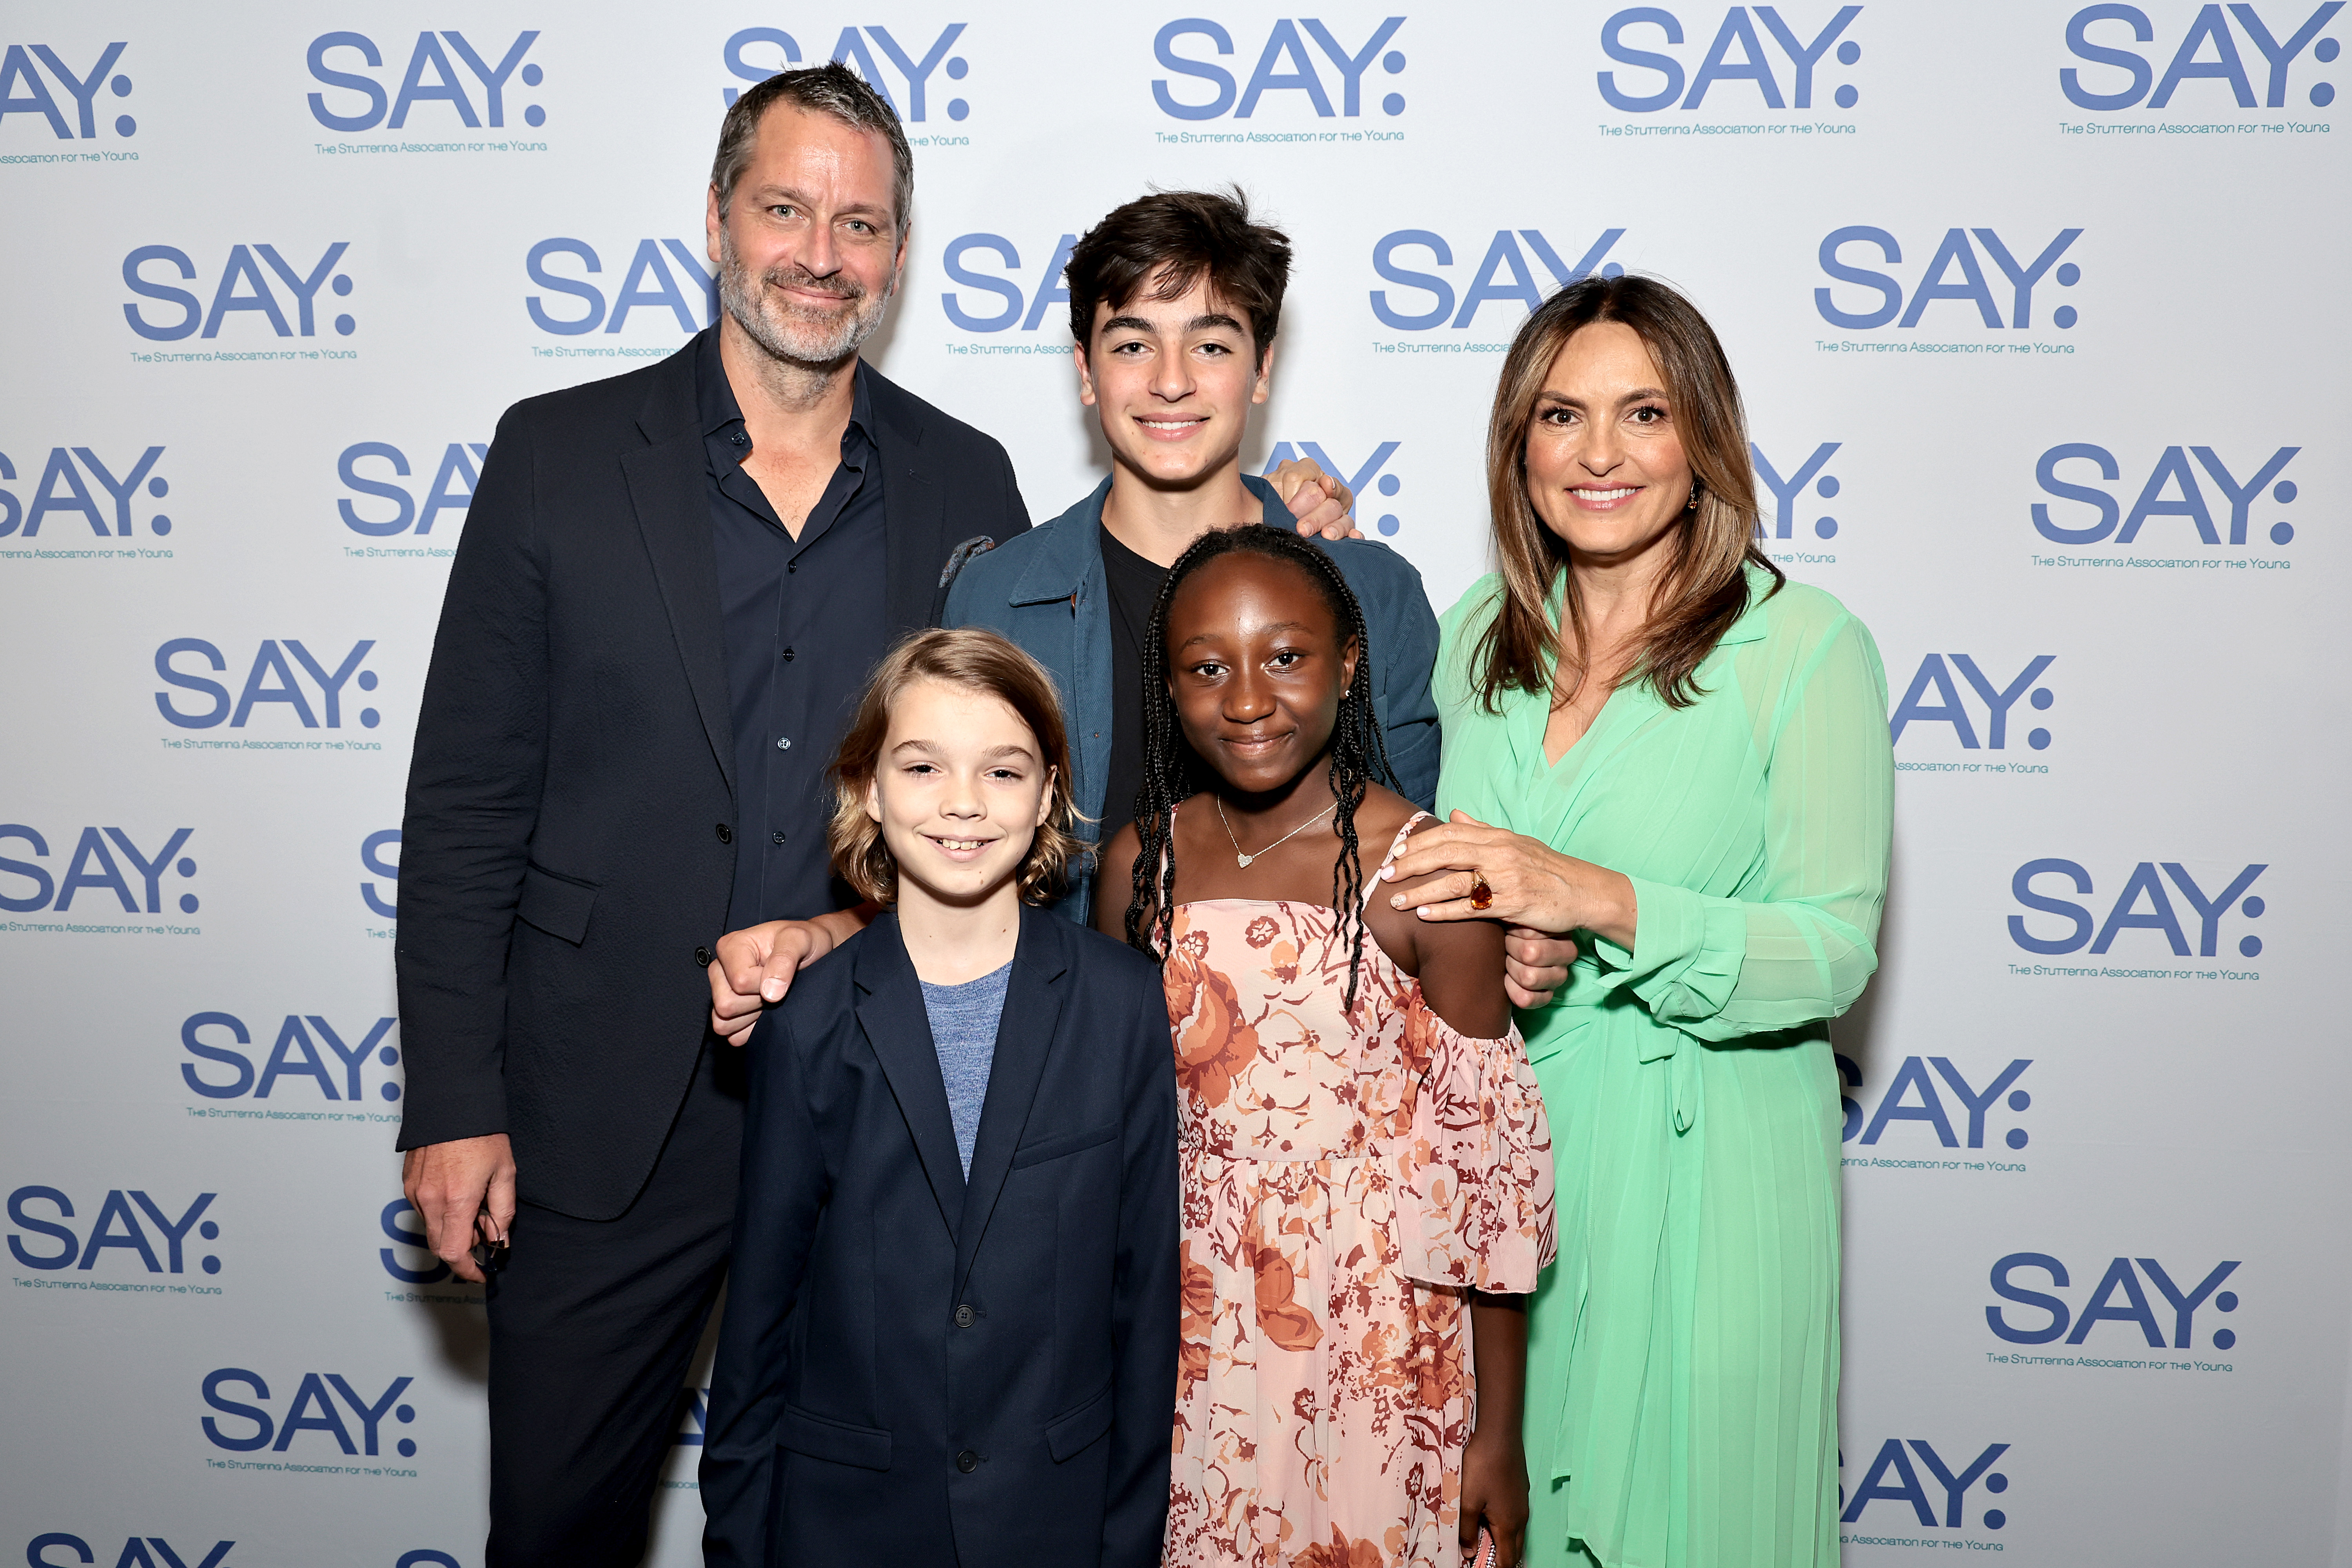 Peter, Andrew, August, and Amaya Hermann and Mariska Hargitay at the 2023 Stuttering Association For The Young (SAY) Benefit Gala in New York, 2023 | Source: Getty Images